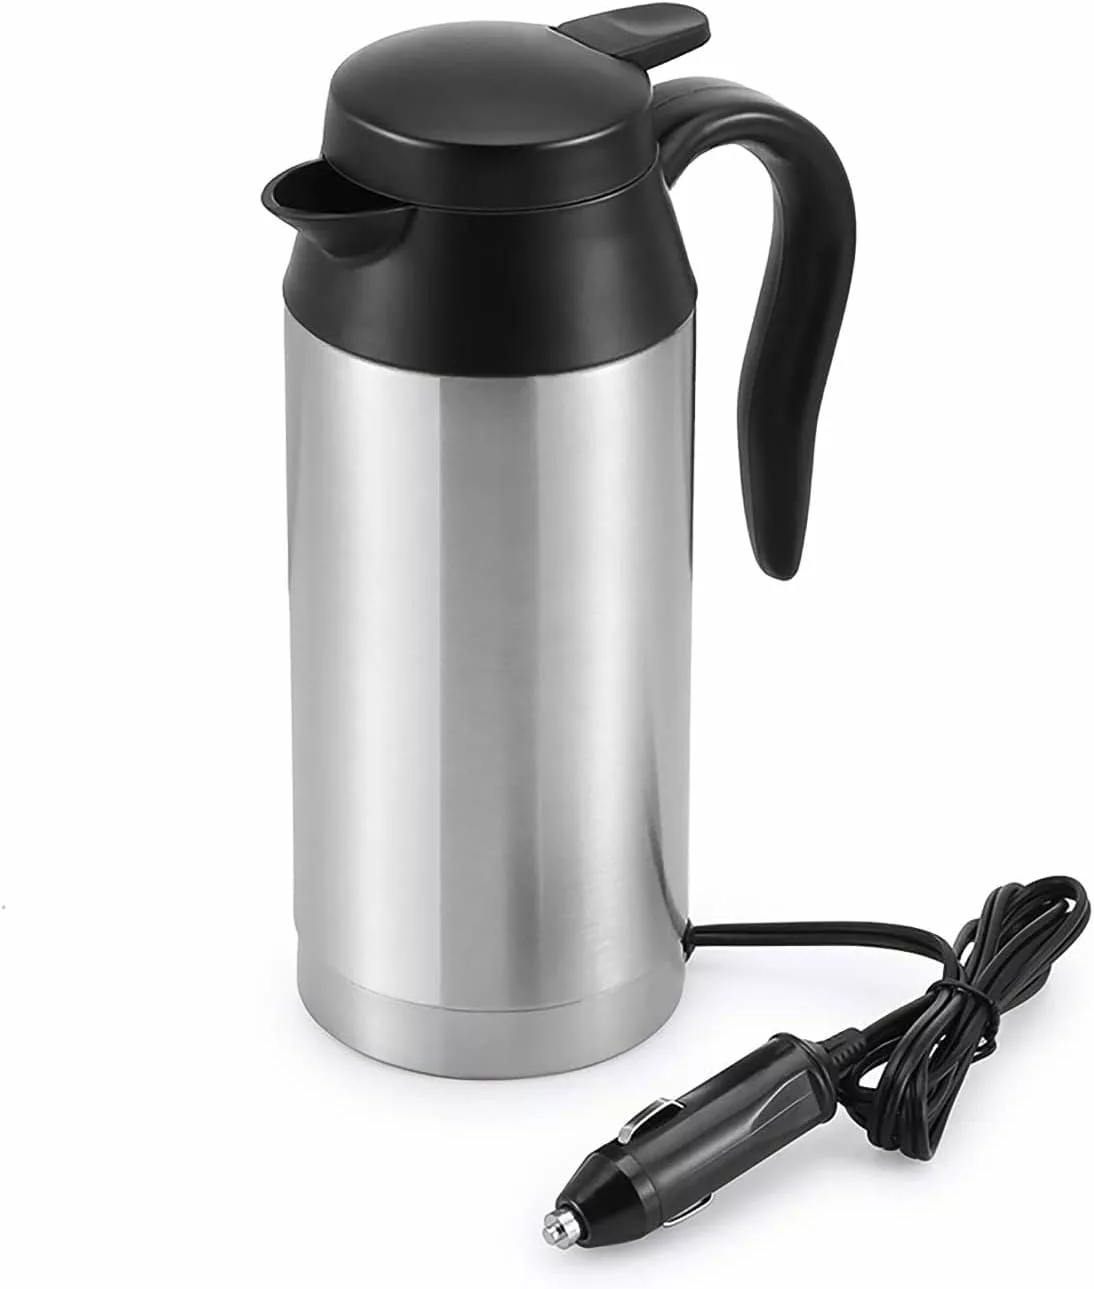 ONEVER Travel Kettle, 650ml 12V Portable Stainless Steel Car Electric Kettle with Sealed Rubber Band Car Heating Cup for Hot Water, Coffee,Travel,Home Use